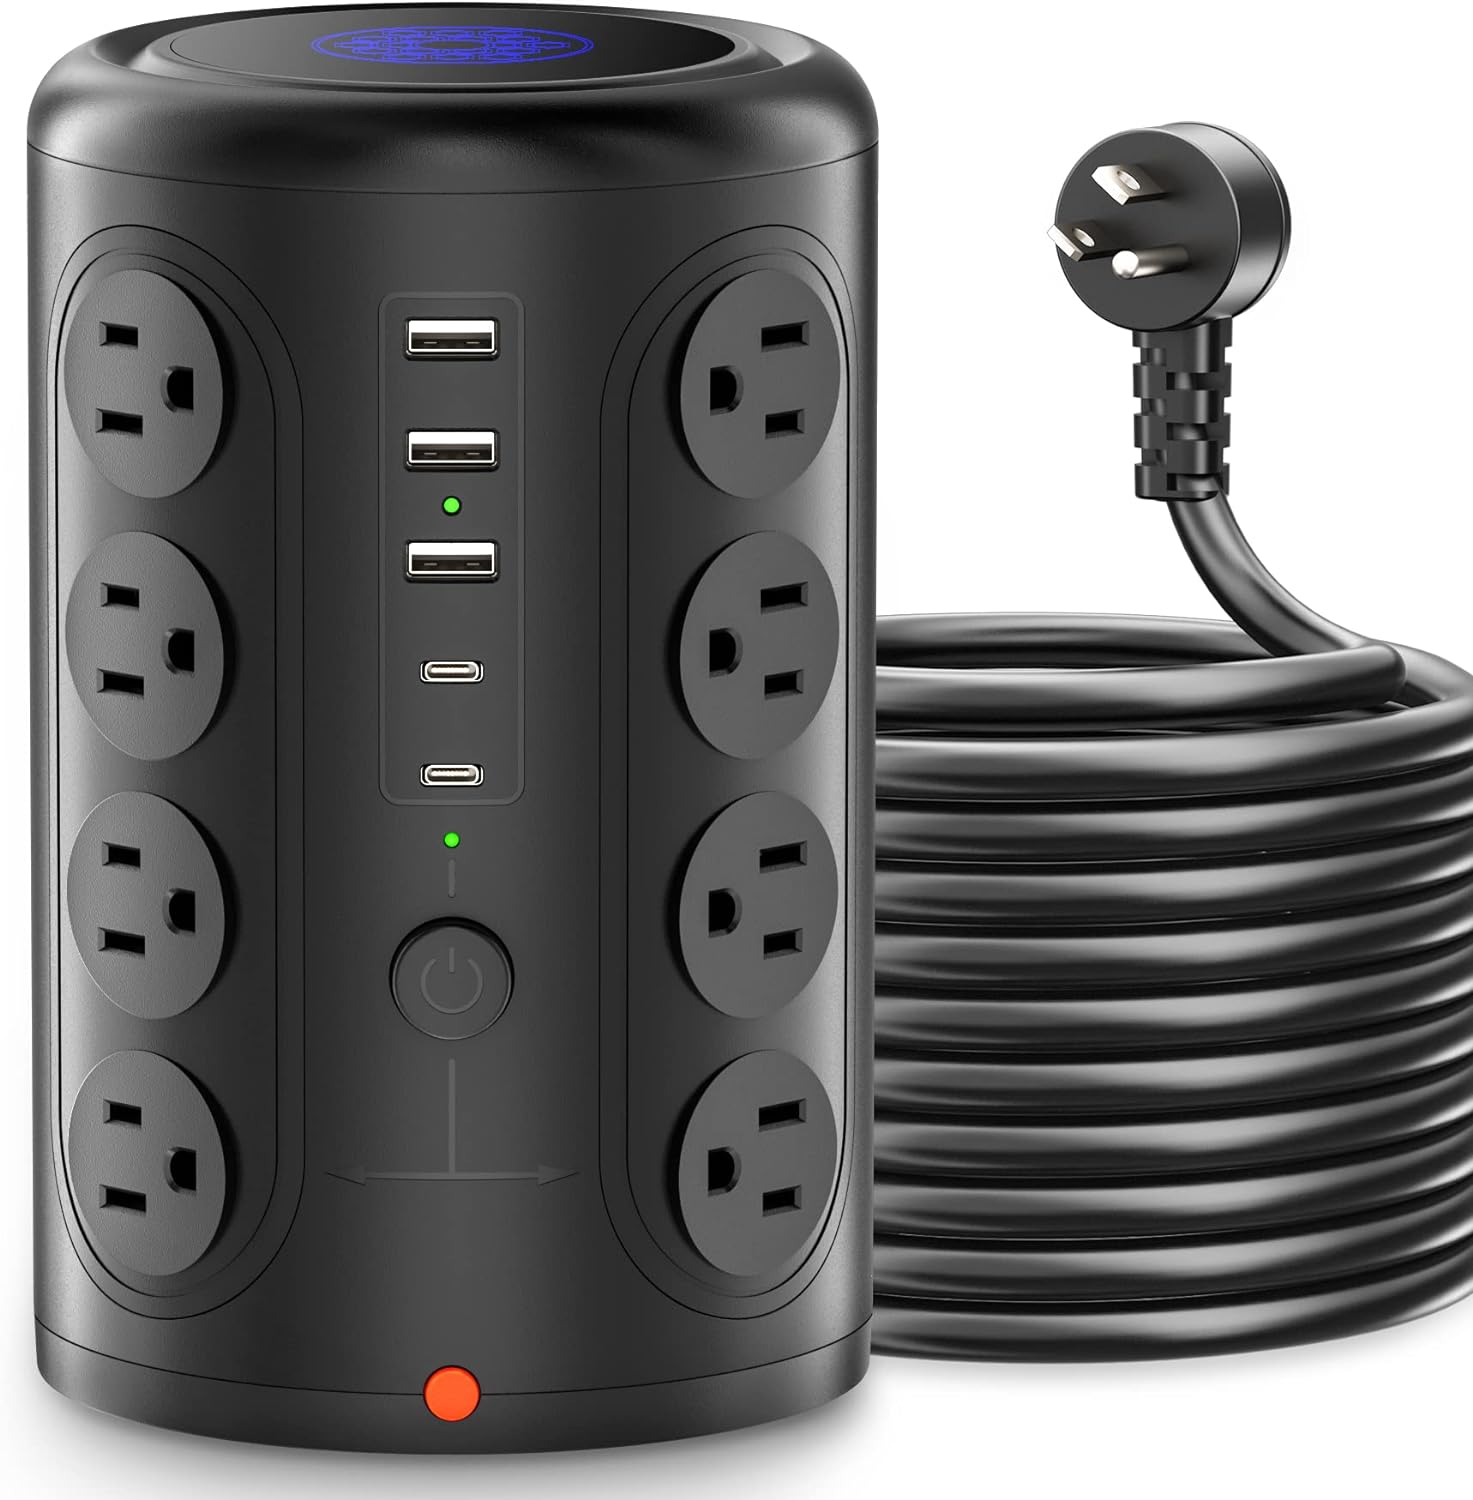 Power Strip Tower: 16 Outlets, 5 USB Ports (2 USB-C), Surge Protector with 6 FT Cord